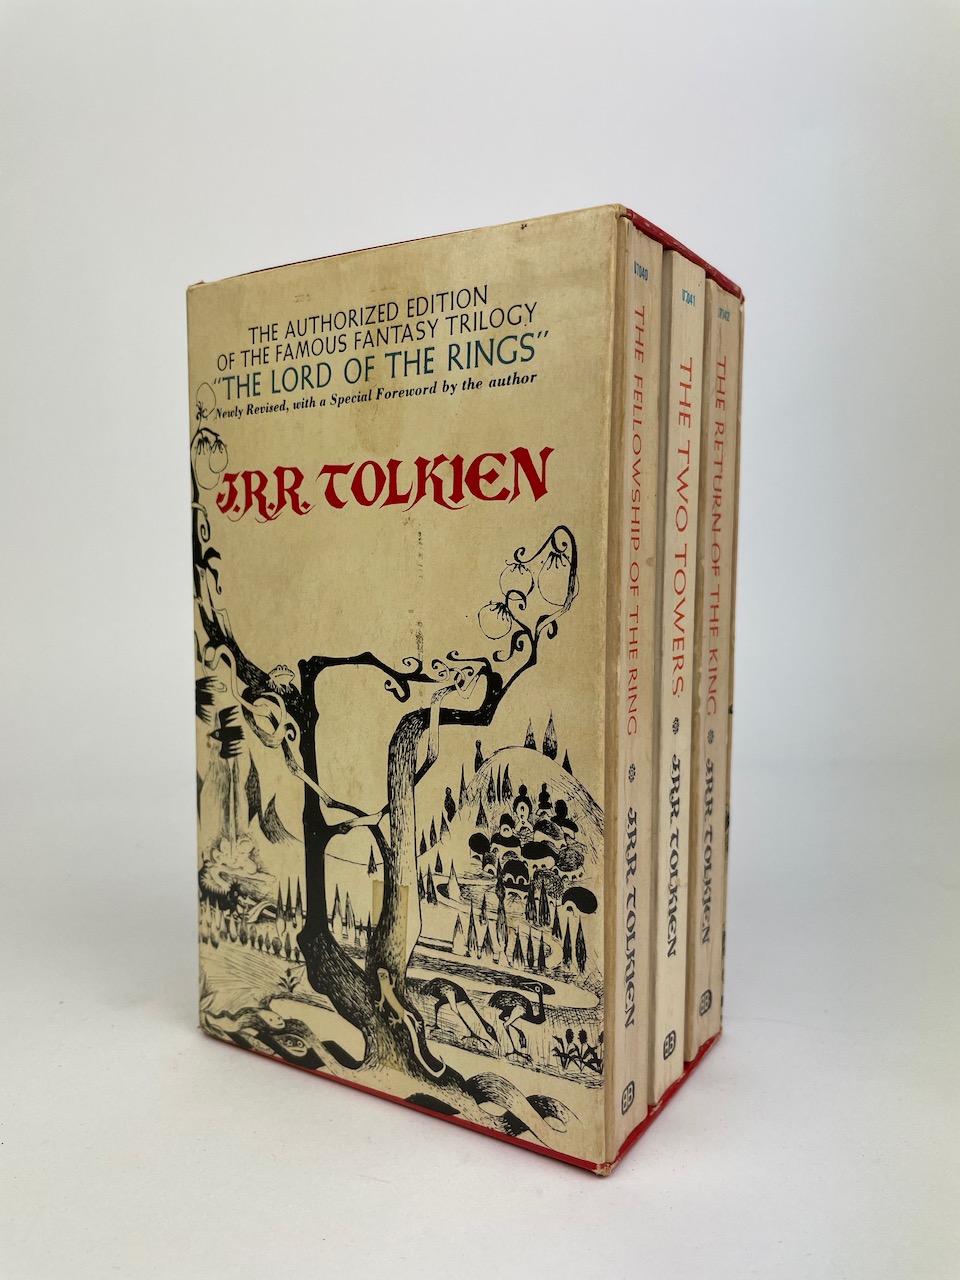 The Lord of the Rings from 1968, Authorized Edition in Black, White and Red Publishers Slipcase 1